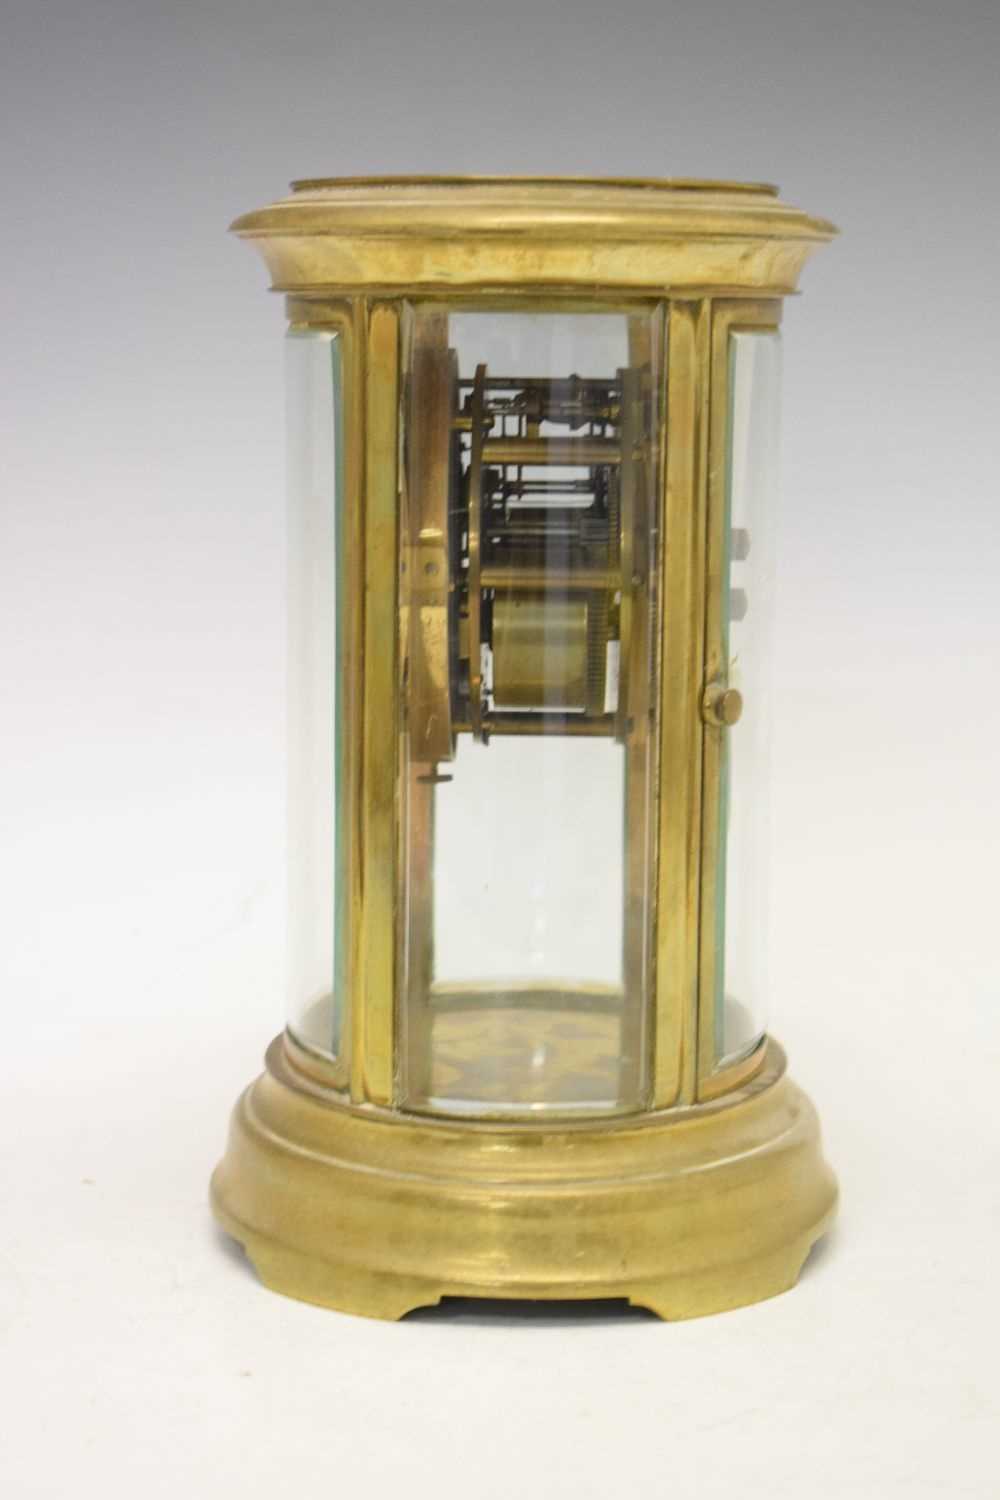 Late 19th or early 20th Century French oval four glass mantel clock - Image 4 of 5